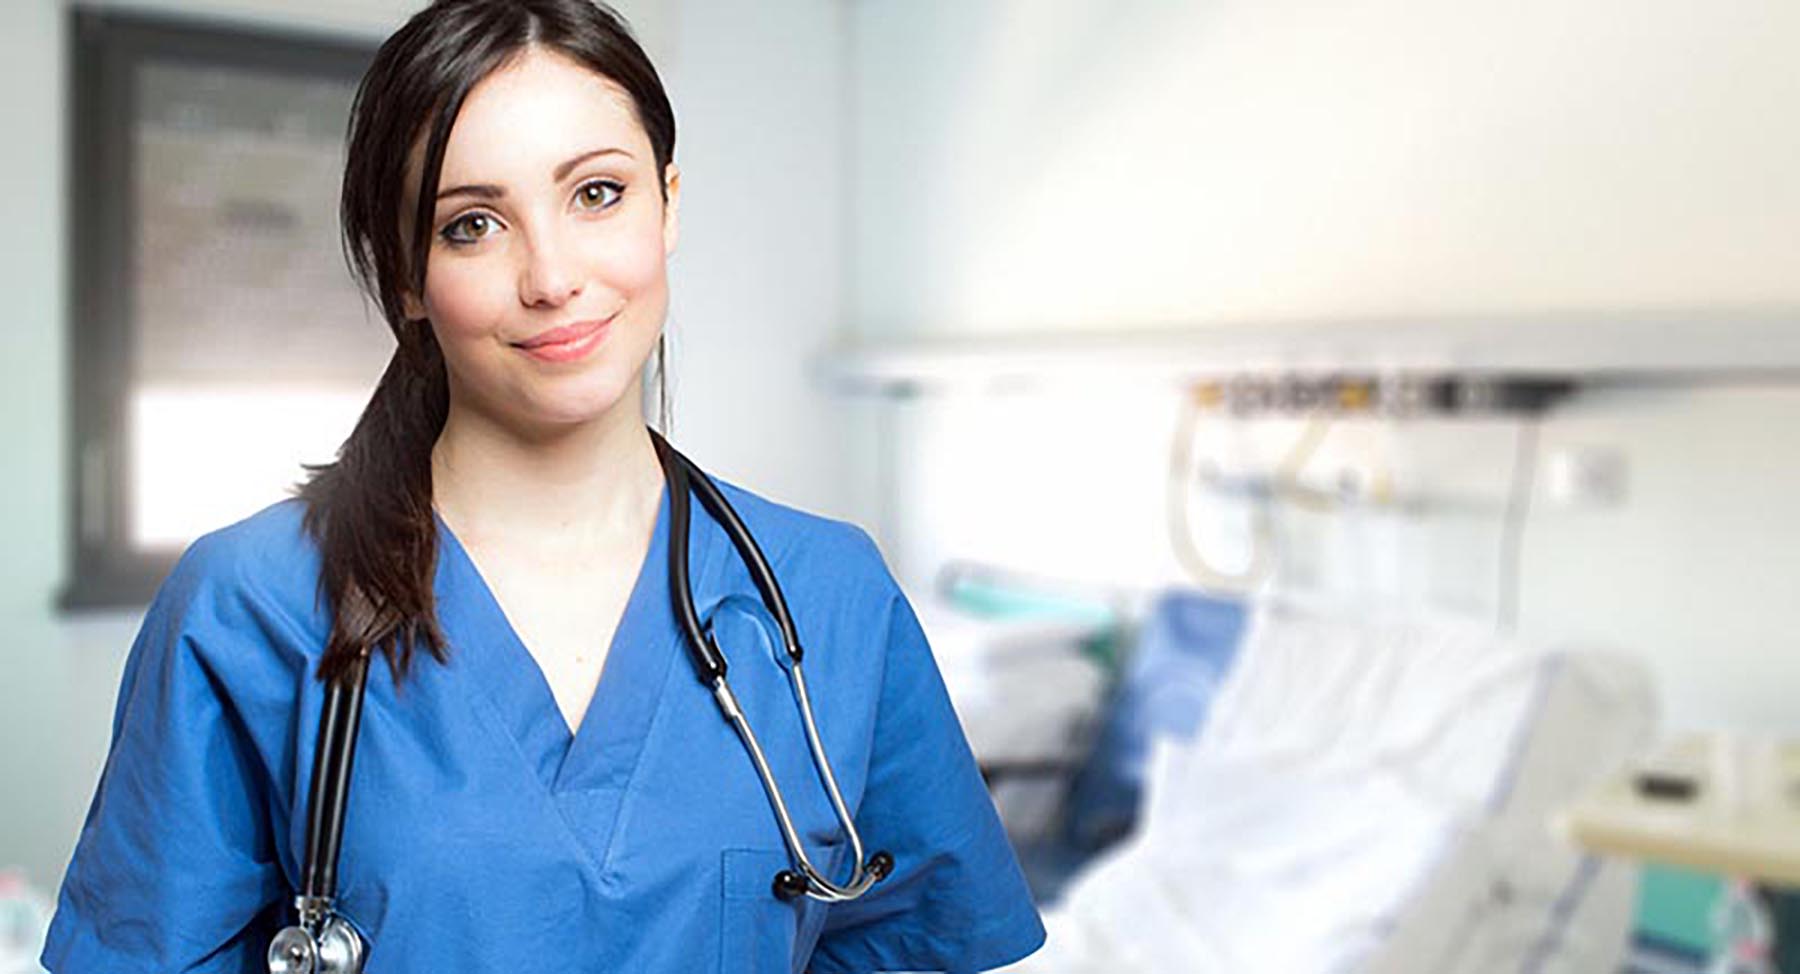 Can You Take the NCLEX Without Going to Nursing School?